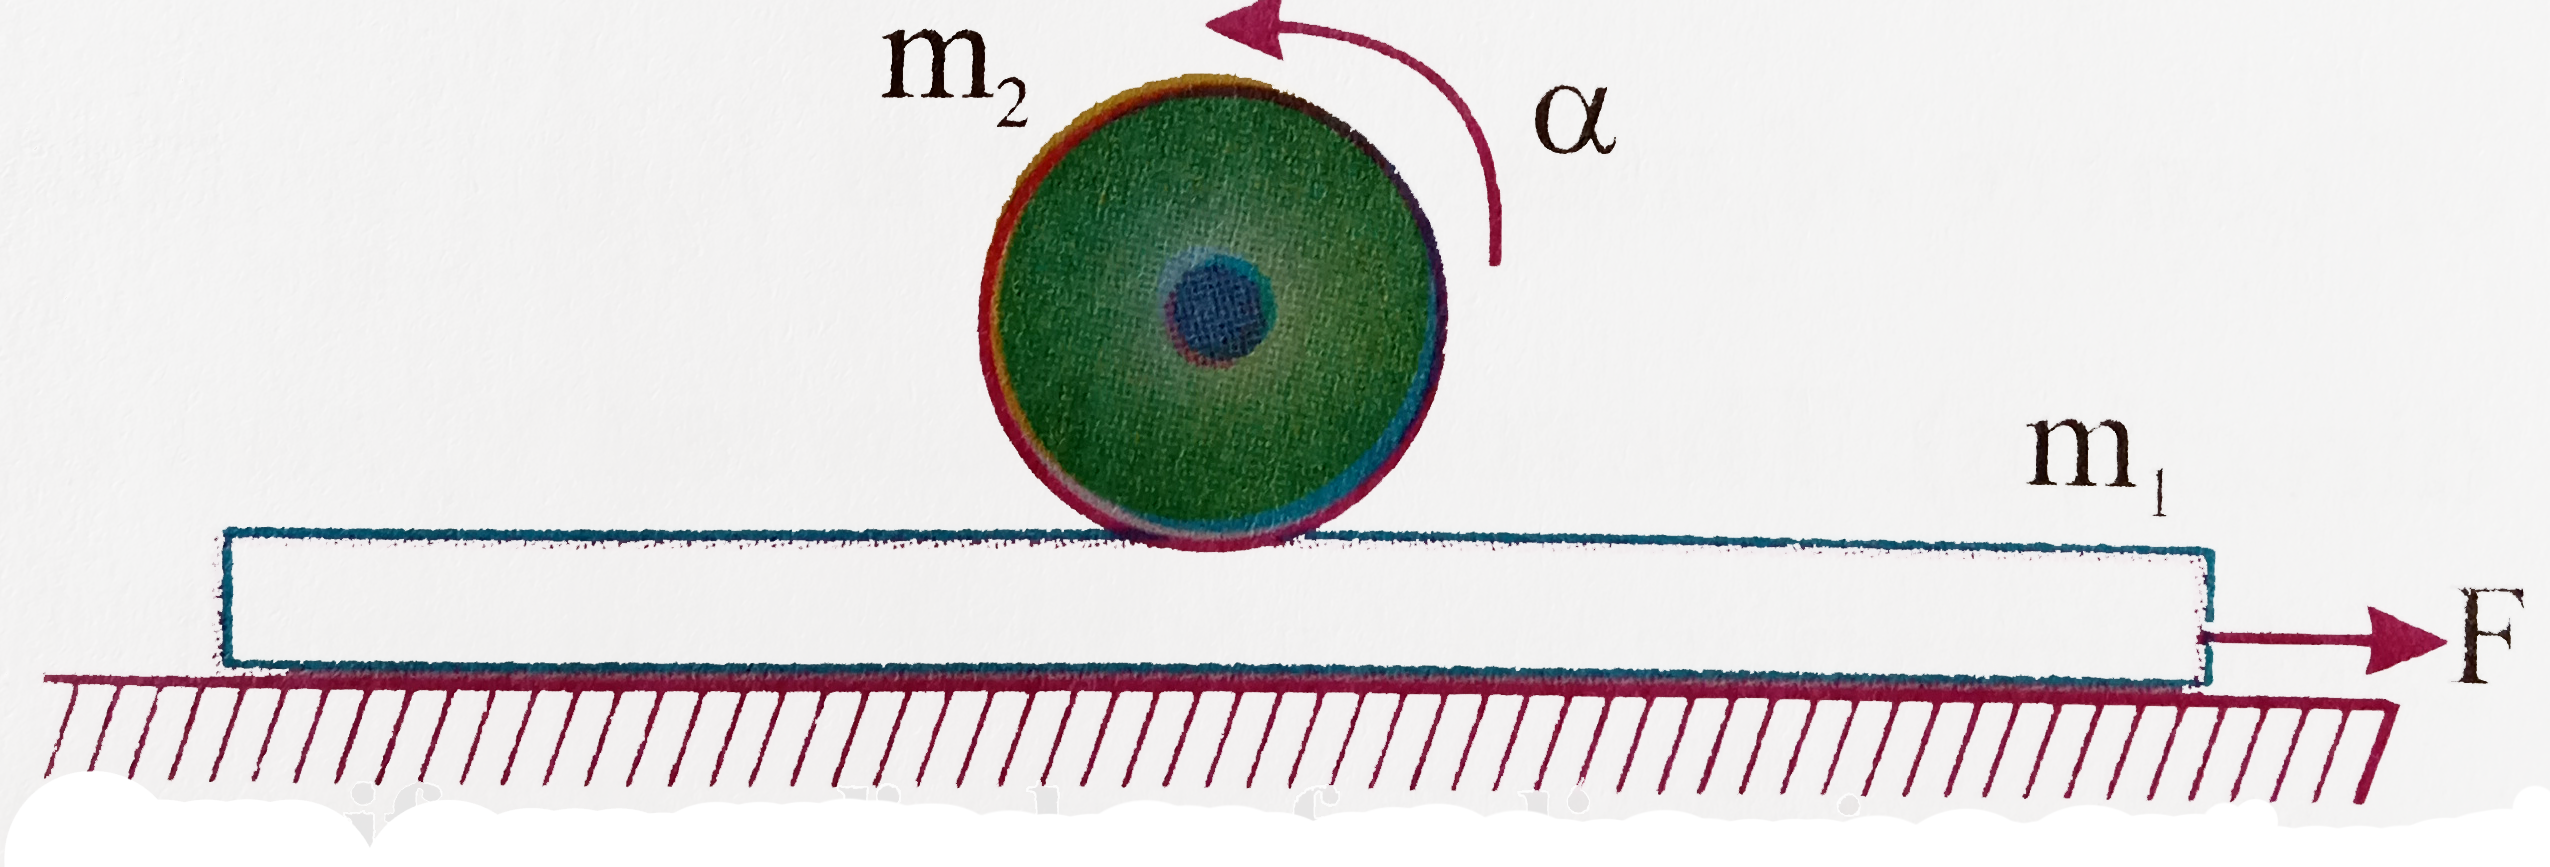 A plank of mass m(1) with a uniform solid sphere of mass m(2) placed on it rests and a force F is applied to the plank. The acceleration of the plank provided there is no sliding between the plank and the sphere is (F/(m(1)+n/7m(2))) then the value of n is